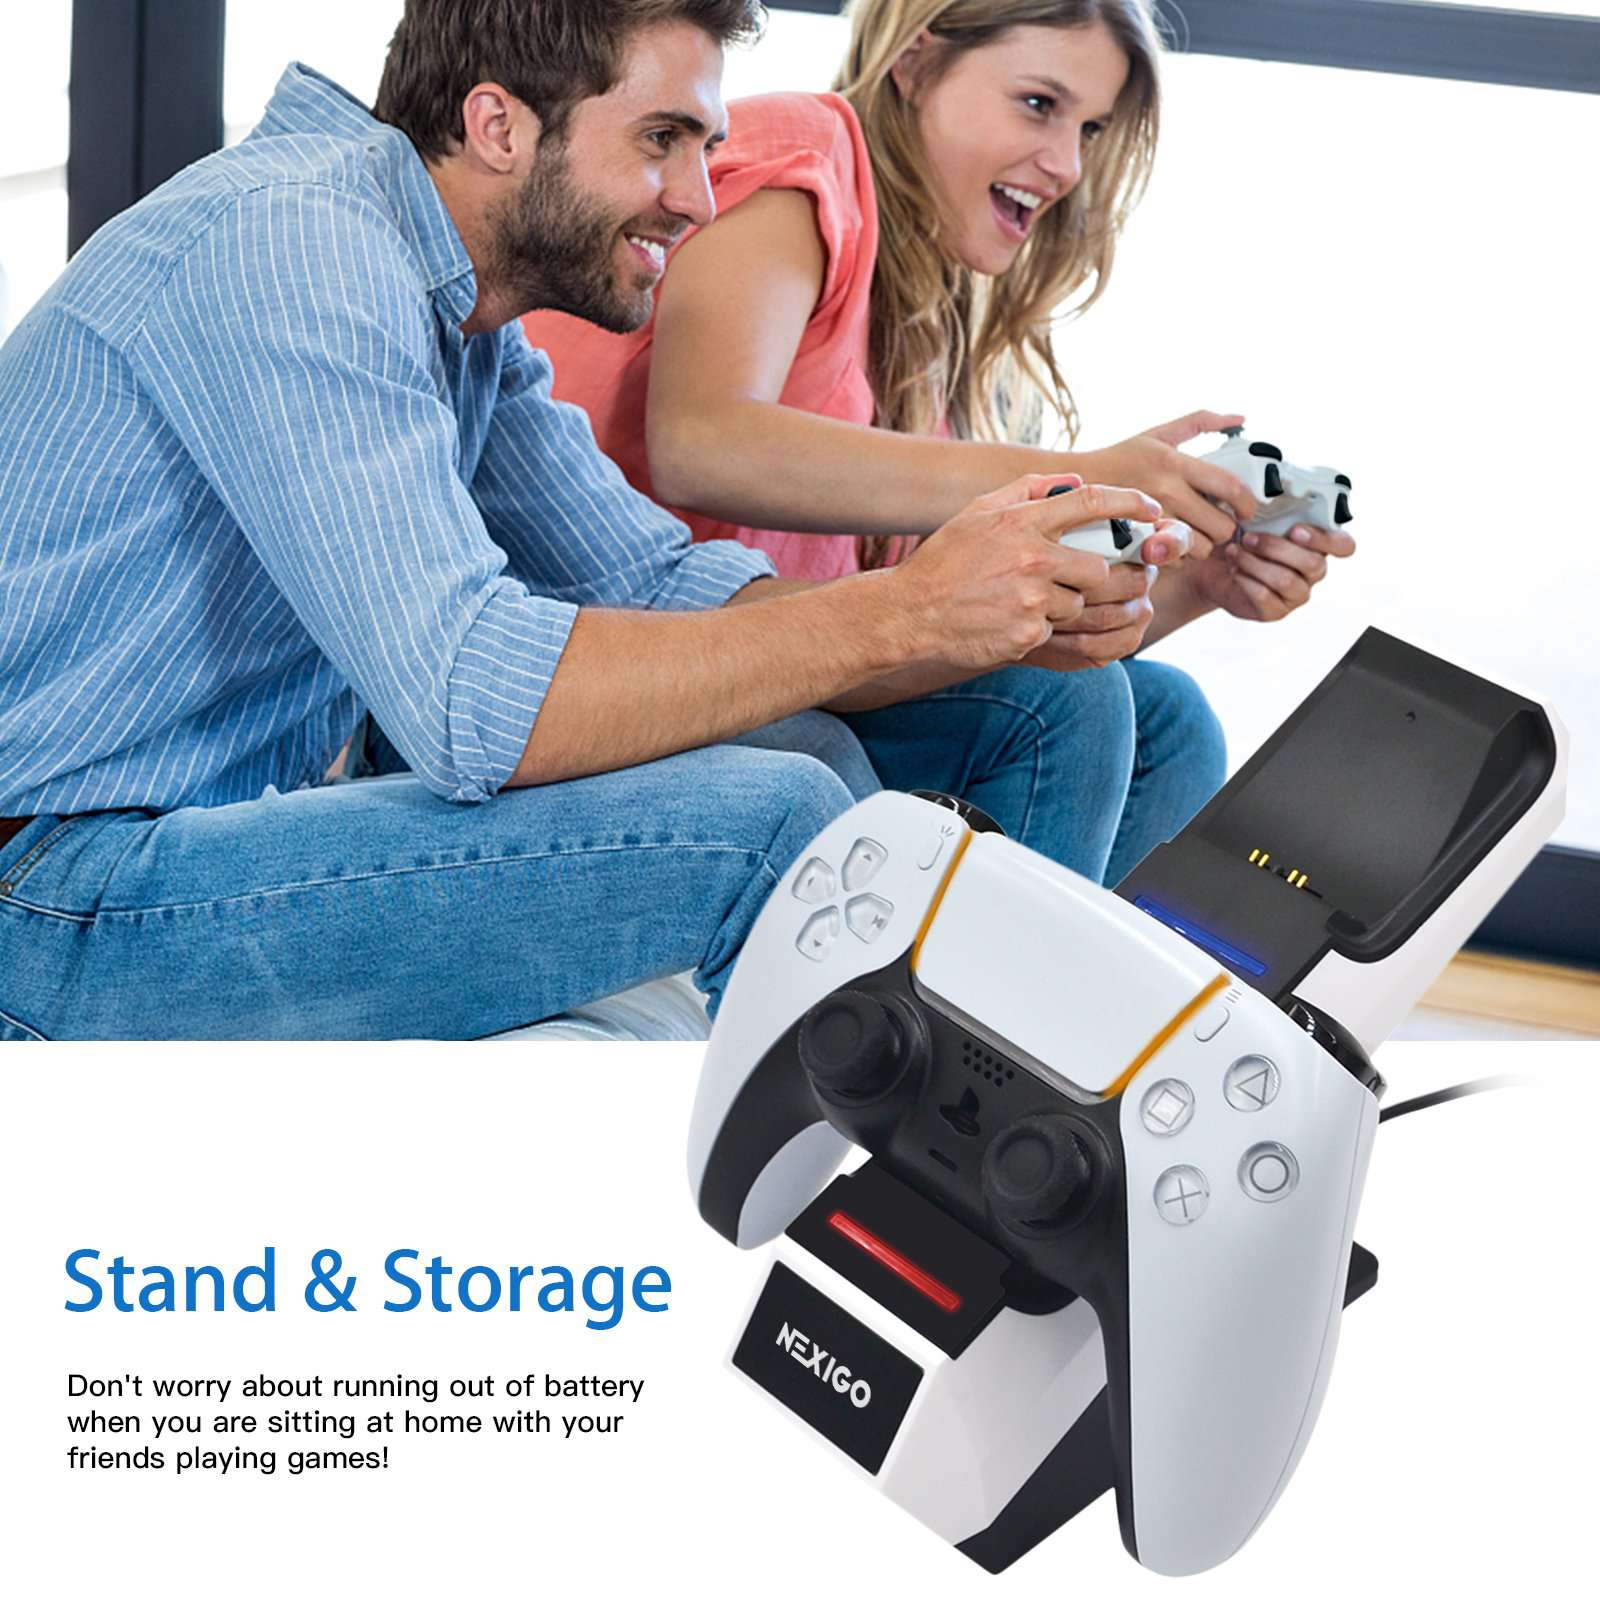 Play PS5 games with peace of mind after two people have used the charging station.